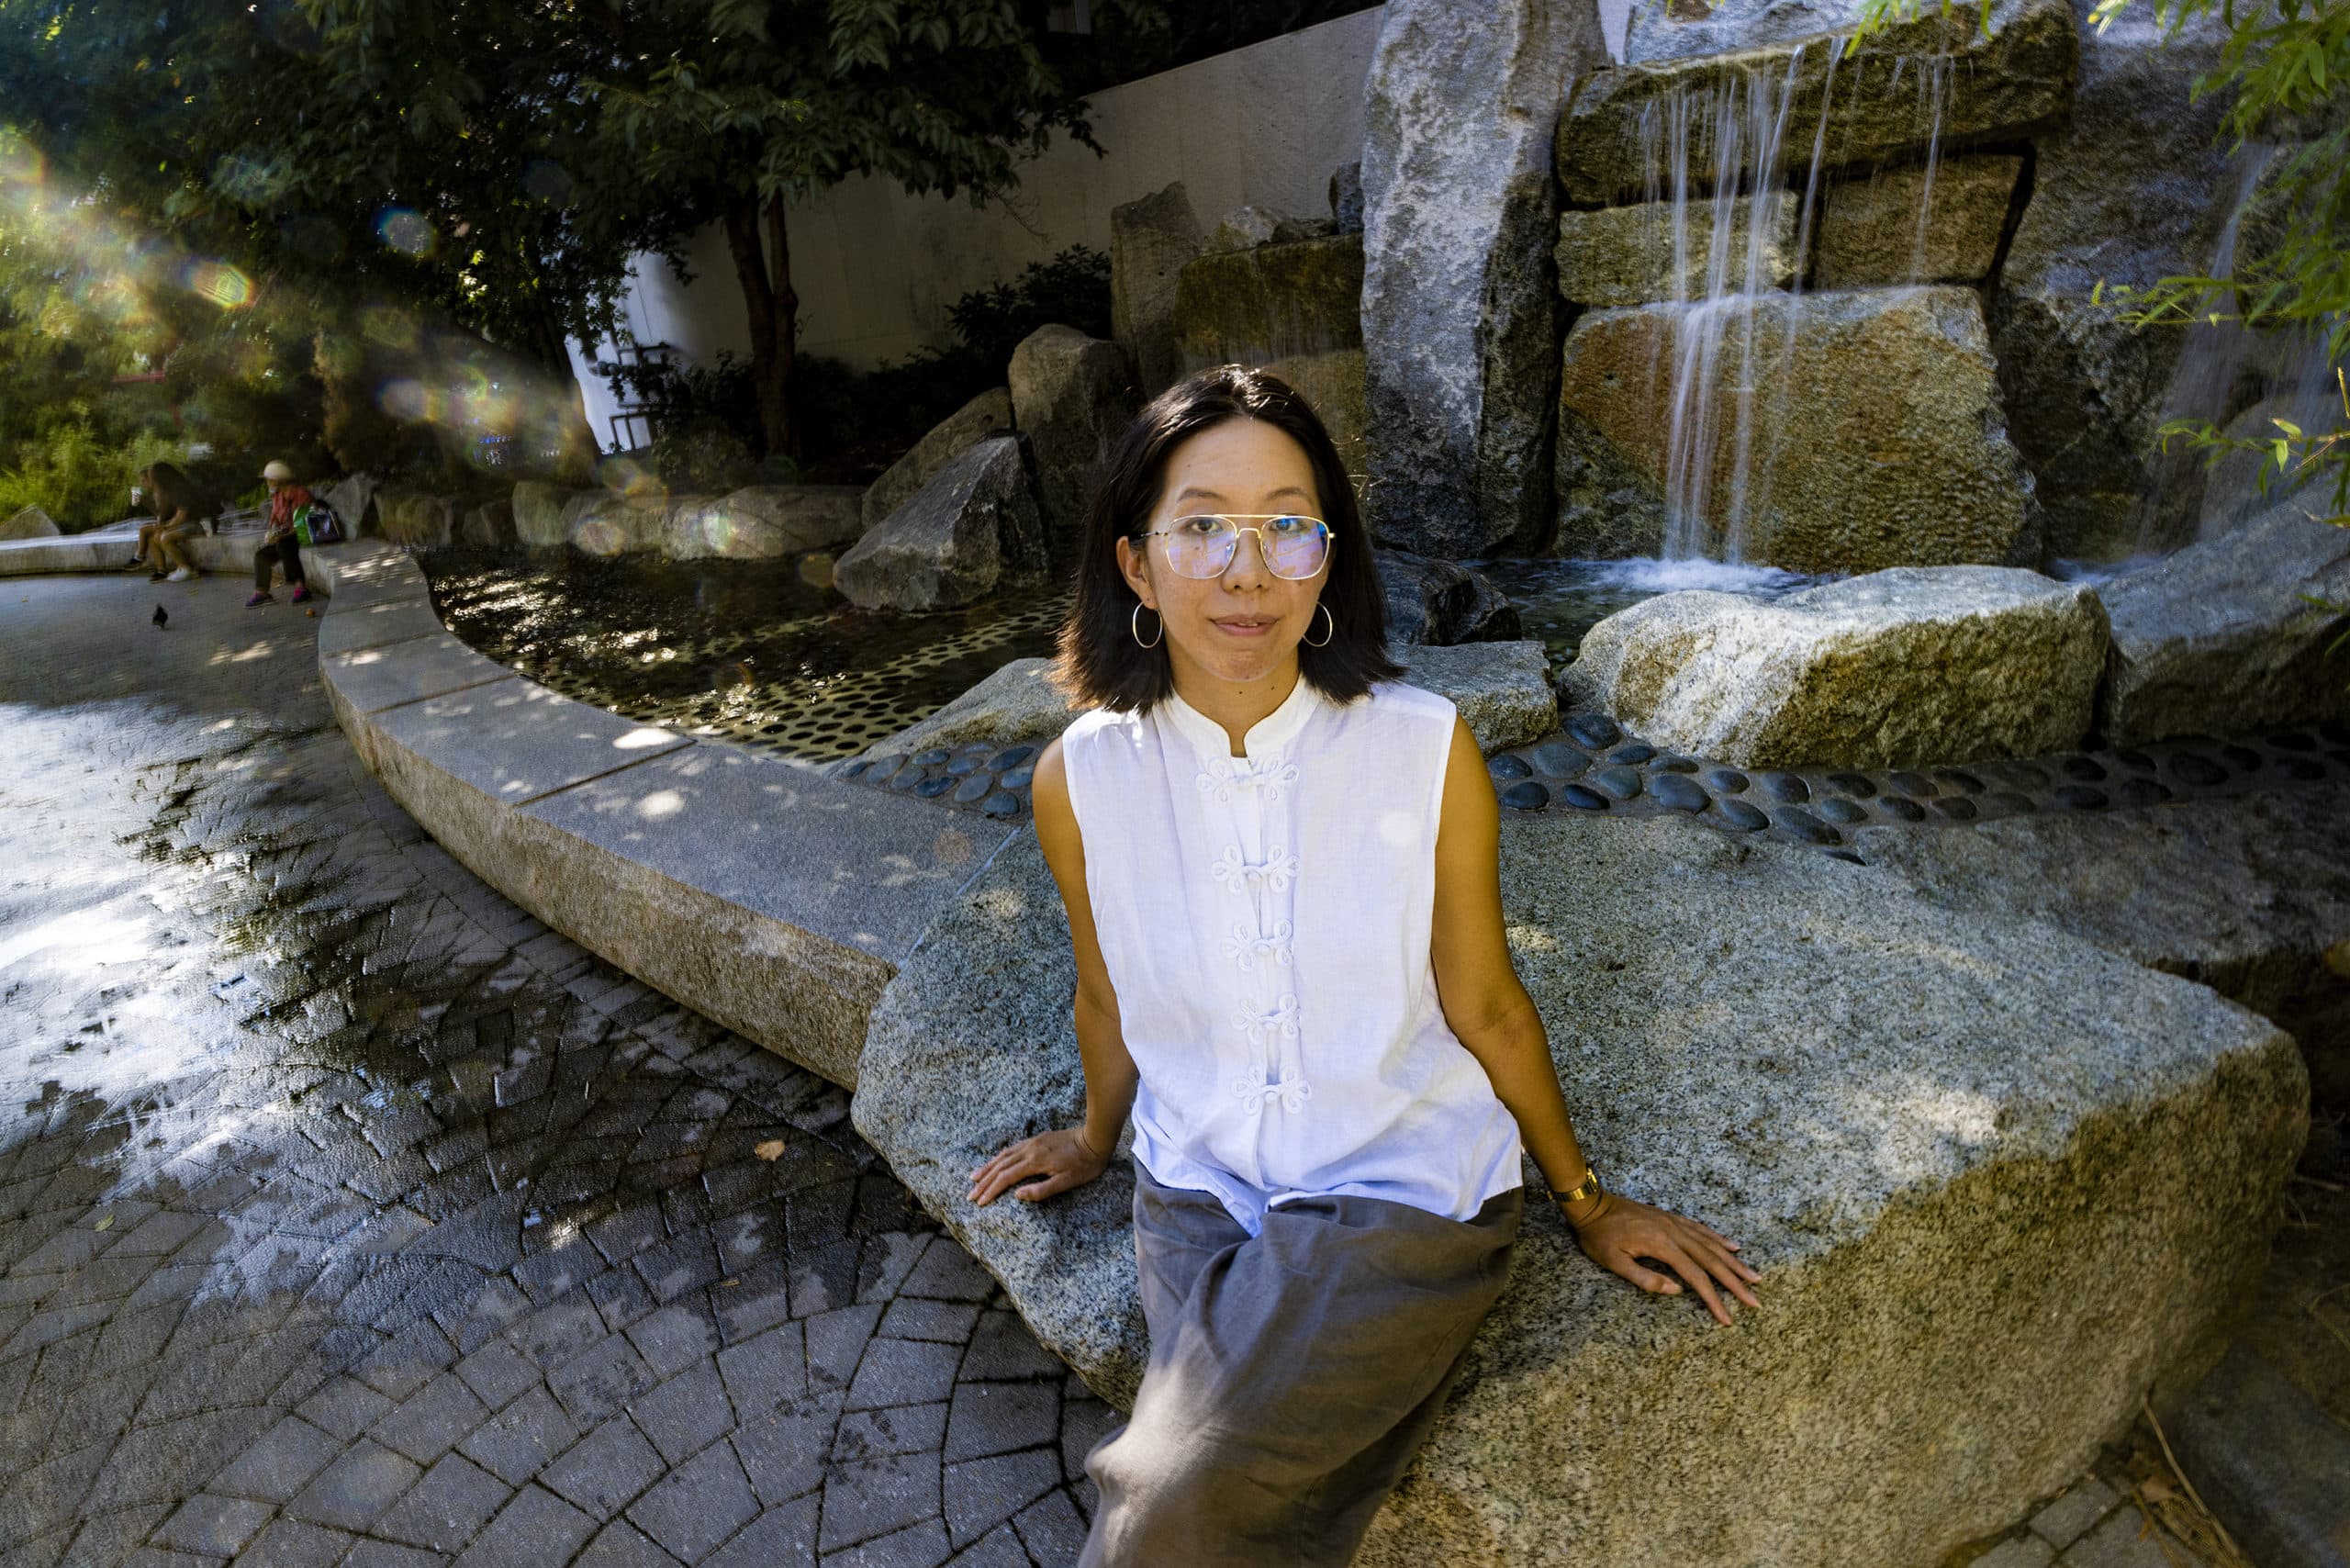 Artist Lily Xie at the River Stream Fountain in Chinatown Park on the Rose Kennedy Greenway. (Jesse Costa/WBUR)